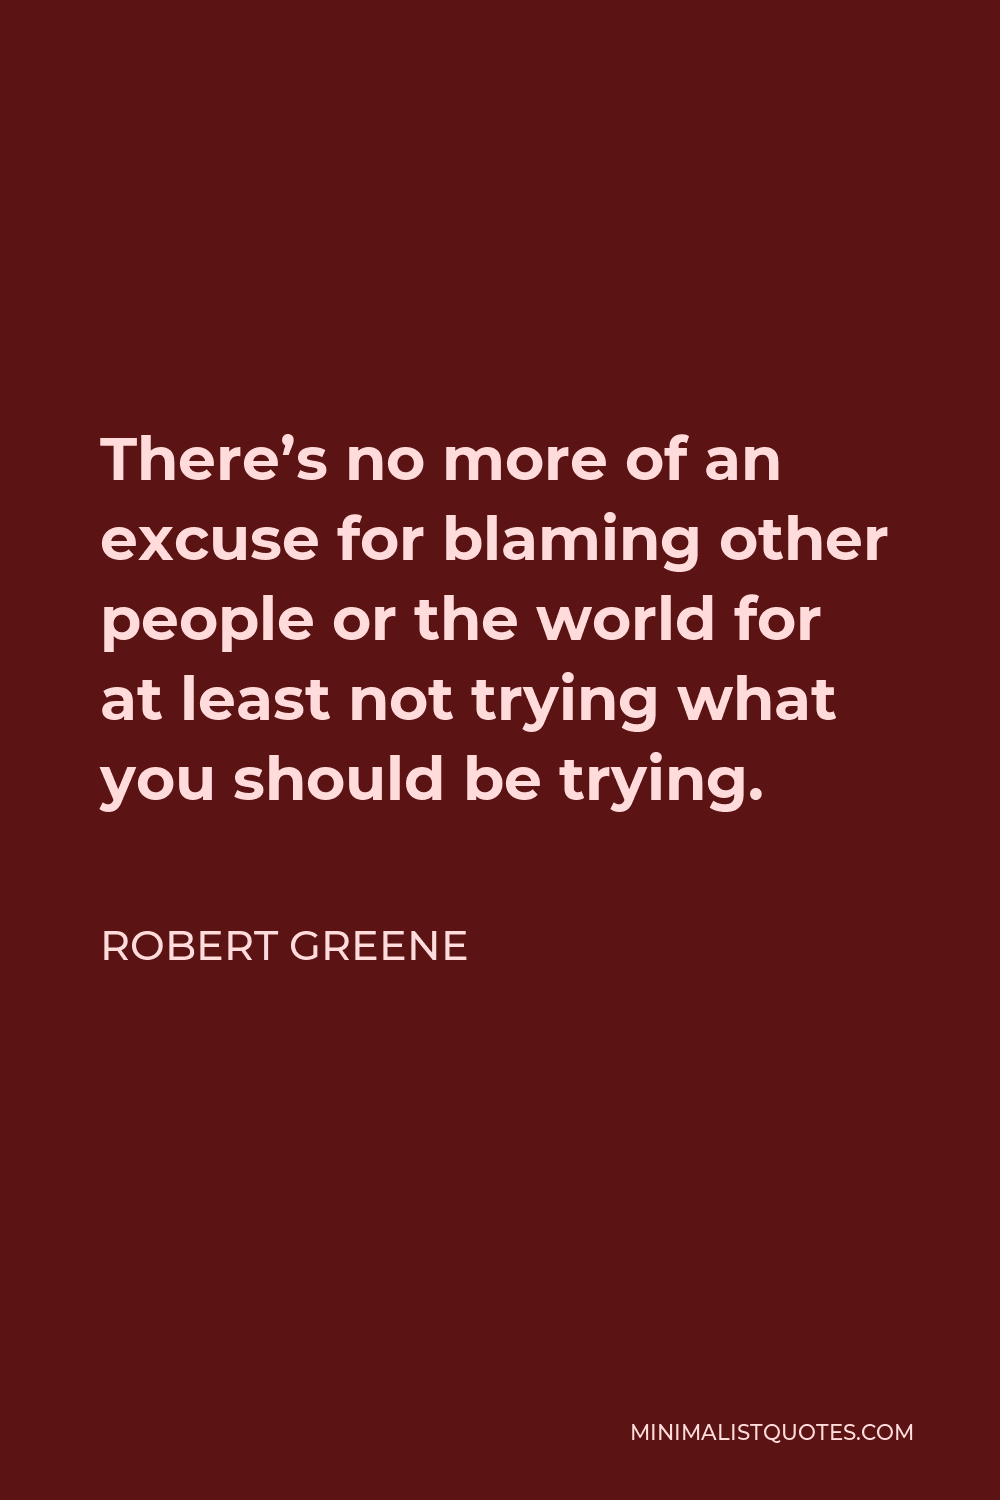 Robert Greene Quote - There’s no more of an excuse for blaming other people or the world for at least not trying what you should be trying.